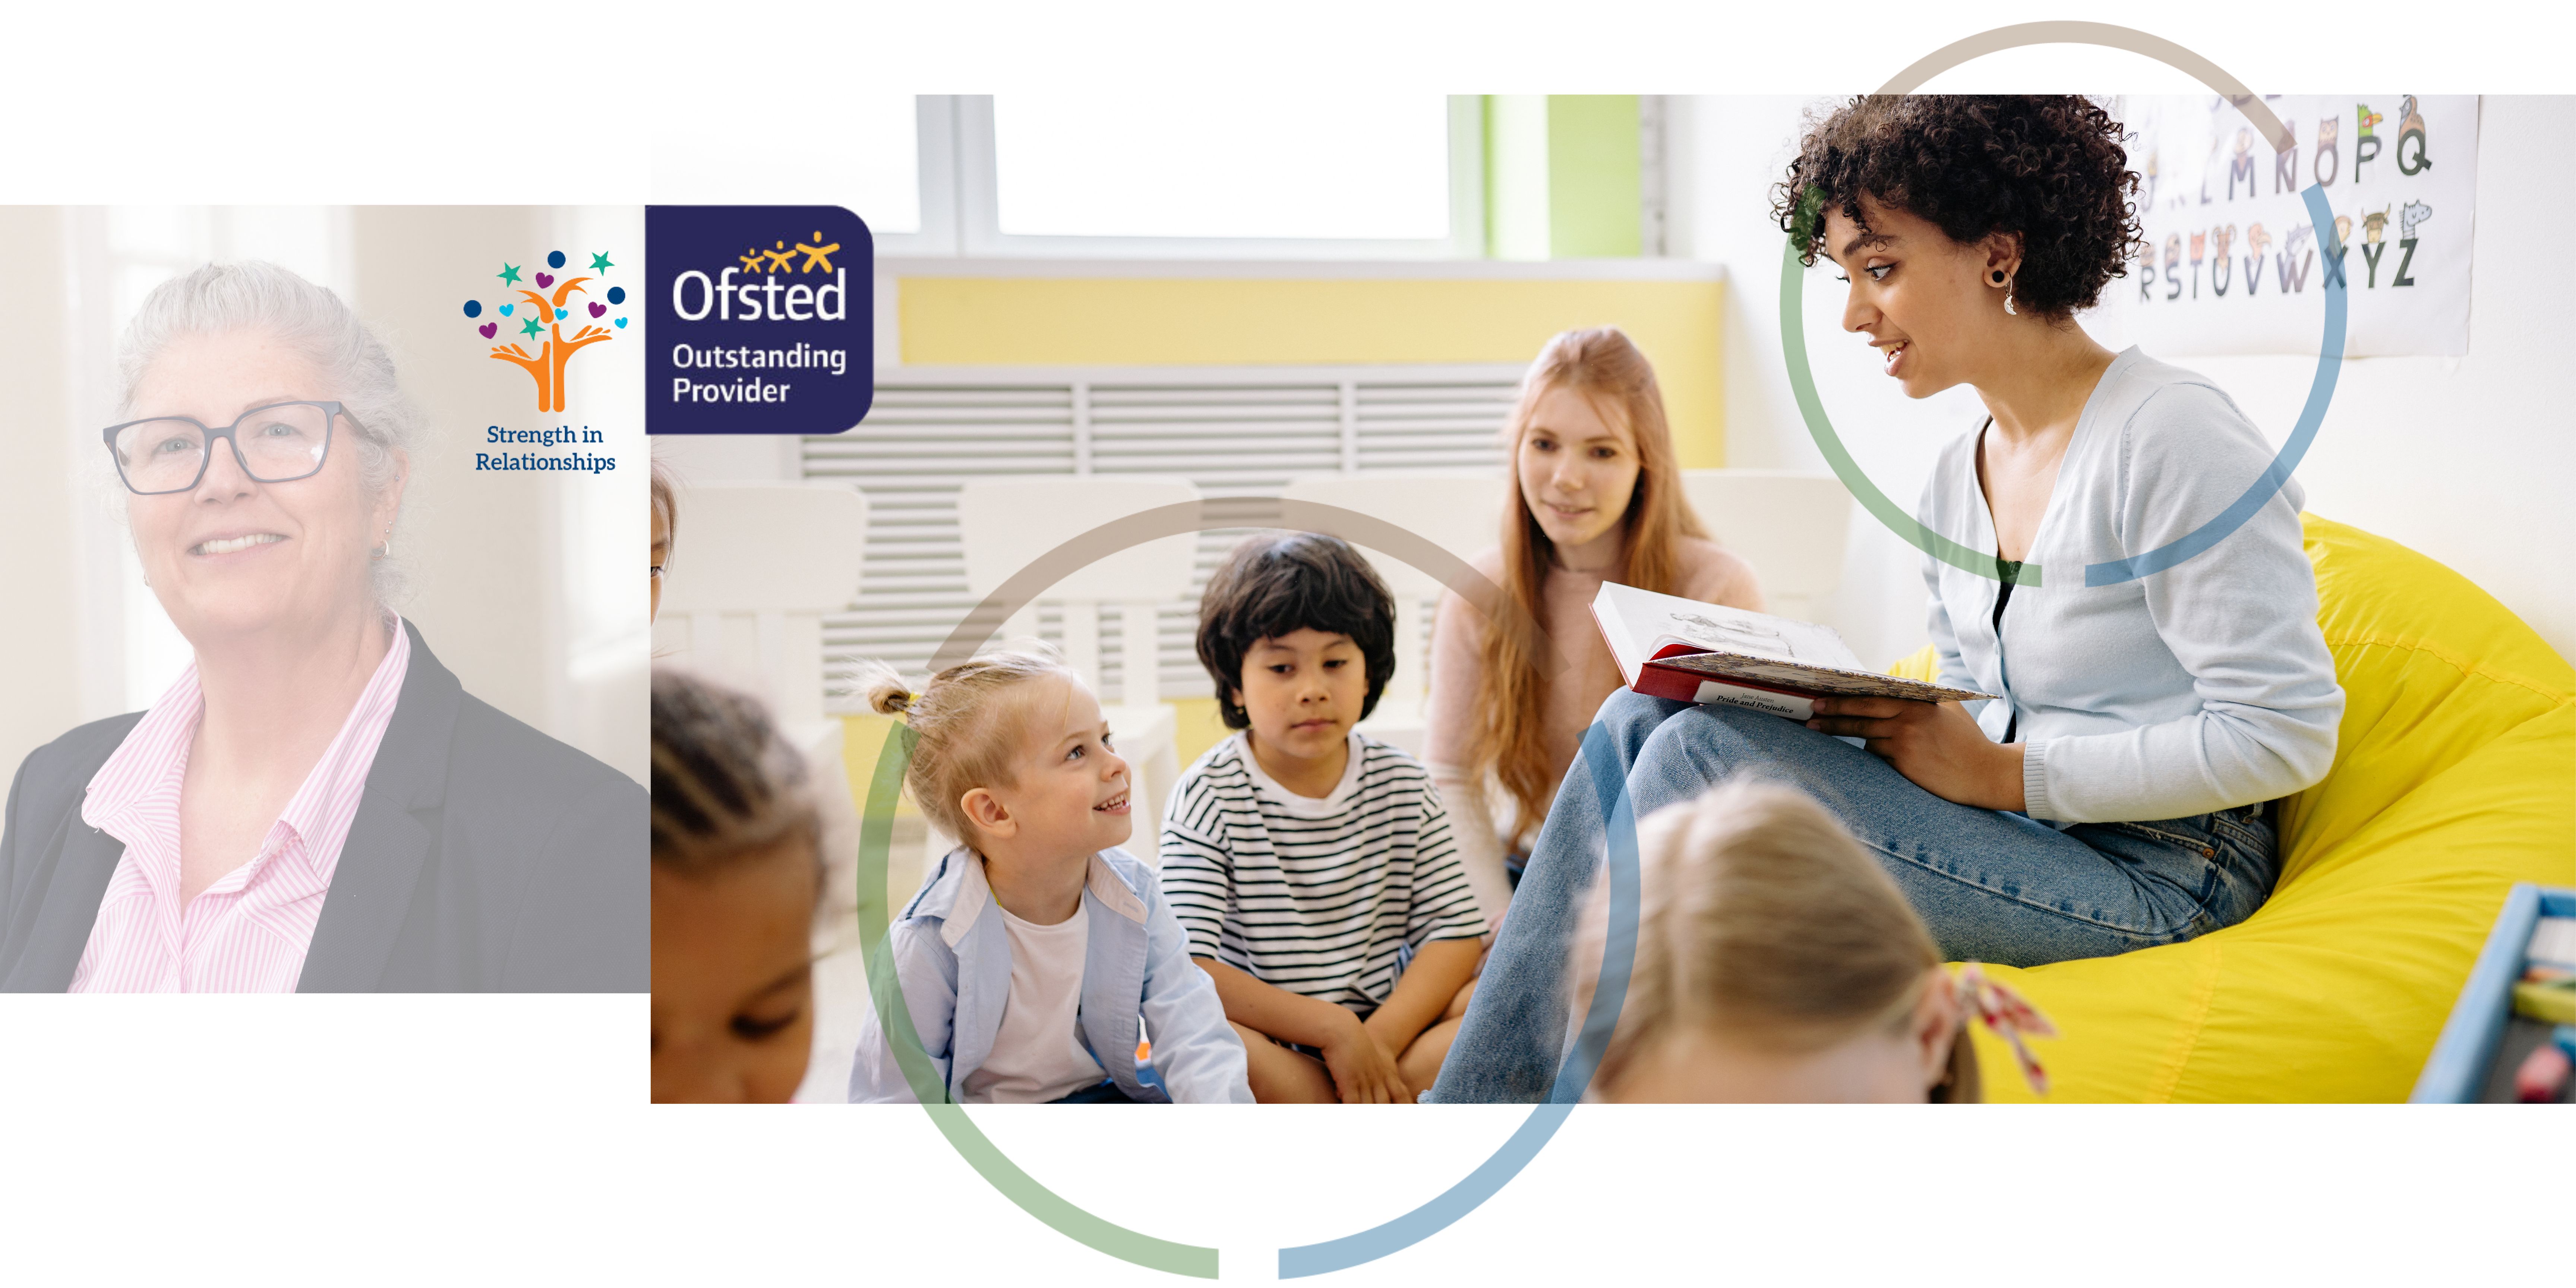 A portrait photograph of a member of the children and families social work team next to an image of a young woman reading a book to a group of children with the Ofsted and strength in partnerships logos.